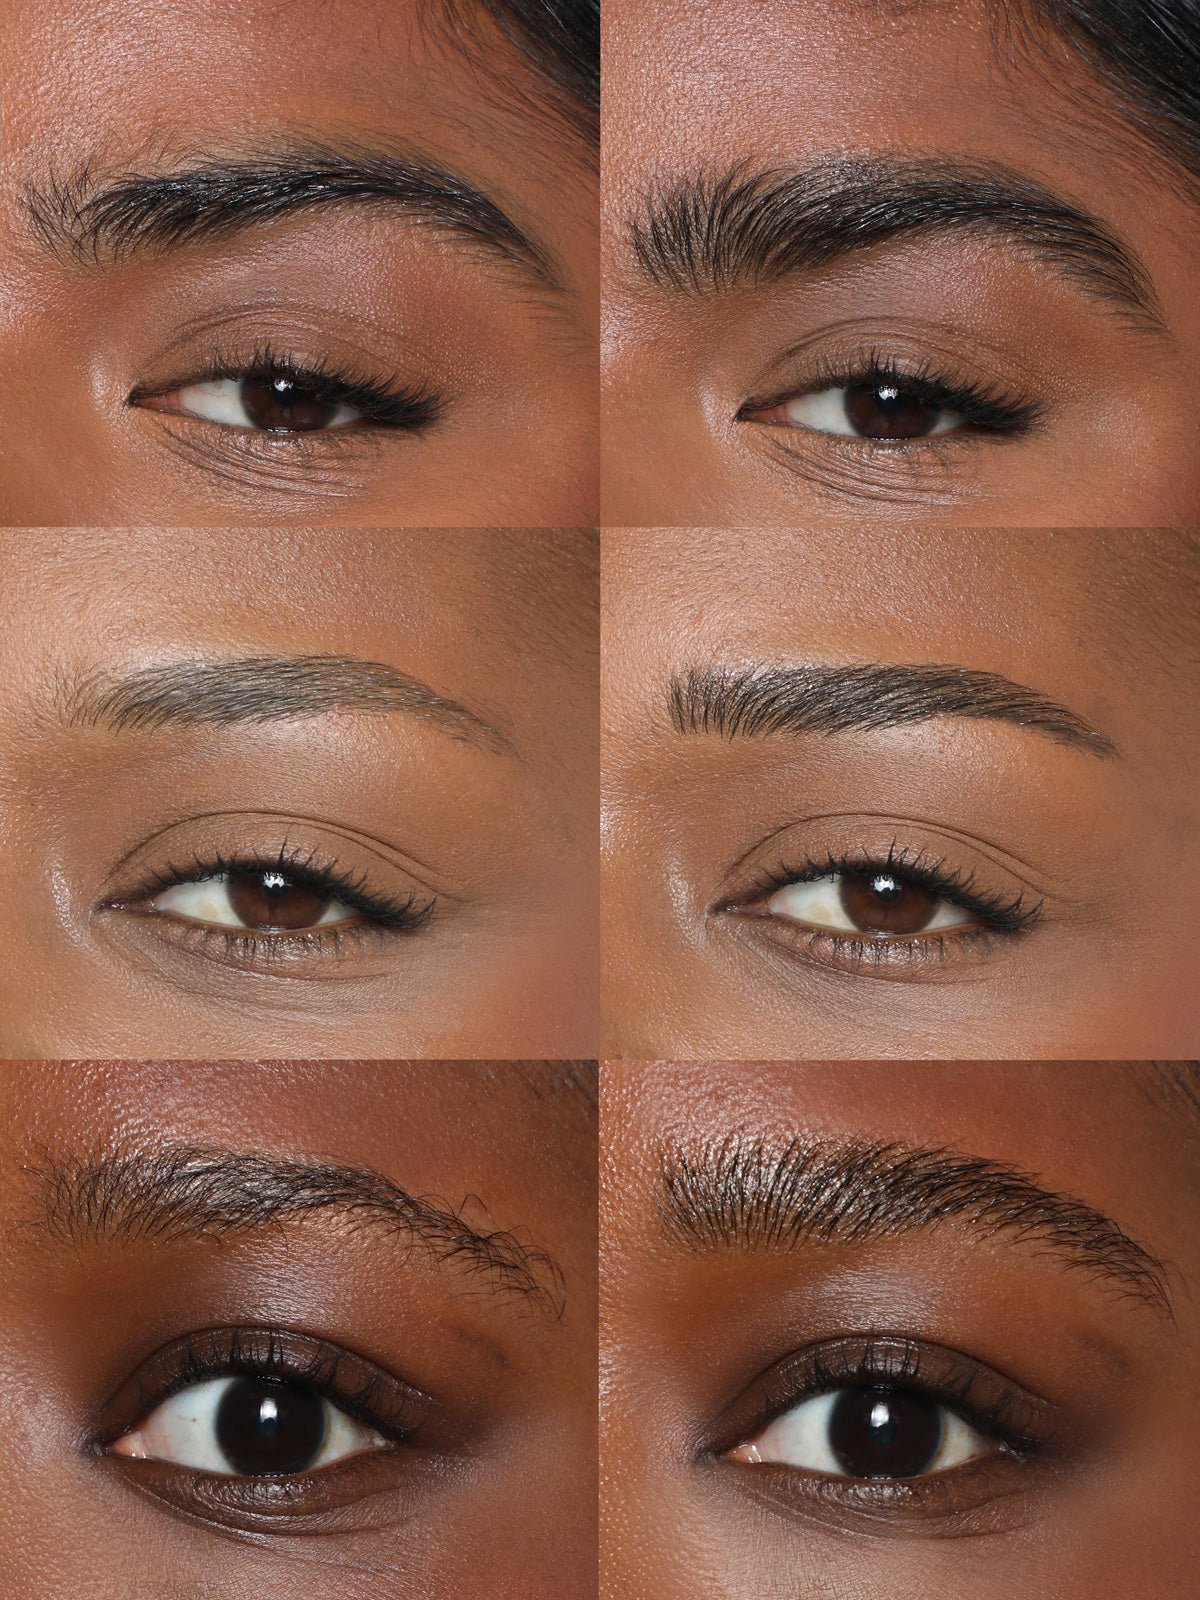 REFY Brow Tint in Black on Models Before and After